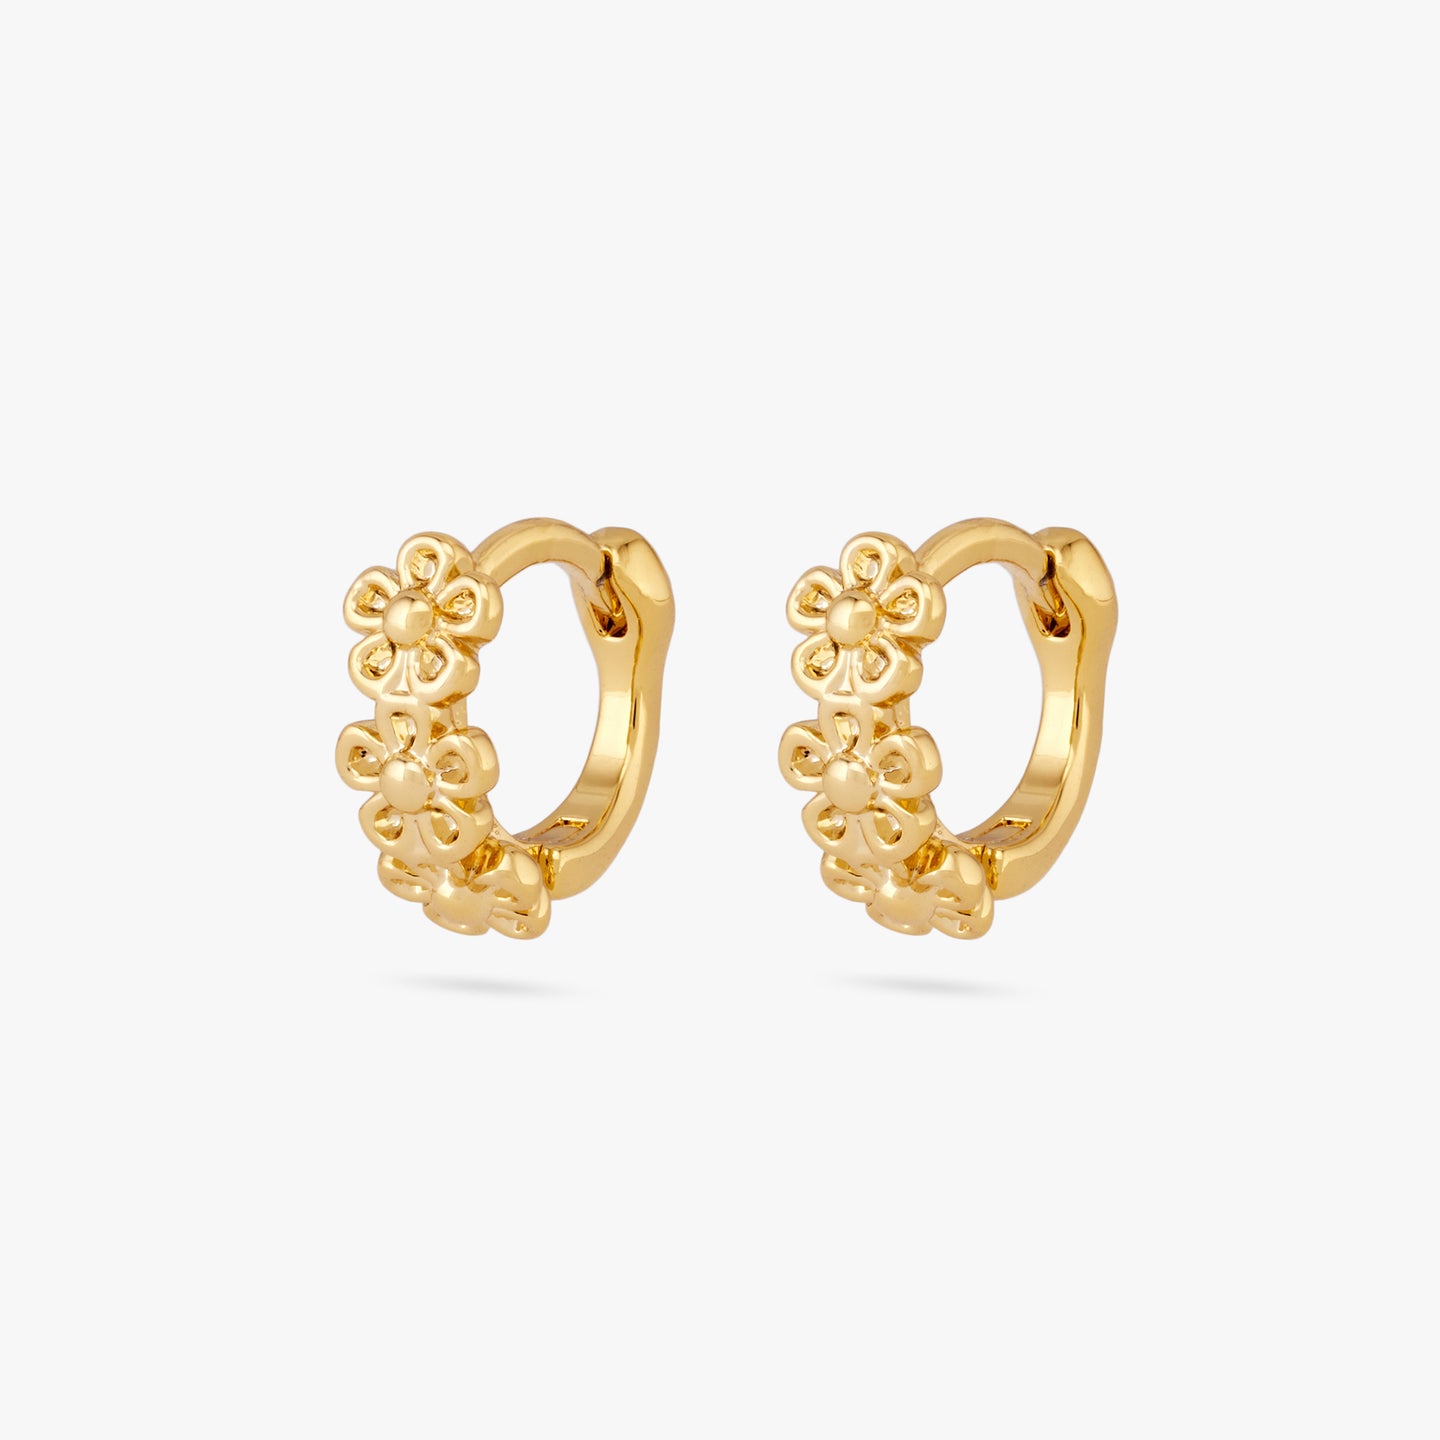 This is a pair of three small gold daisy-shaped flowers on micro huggies [pair] color:null|gold